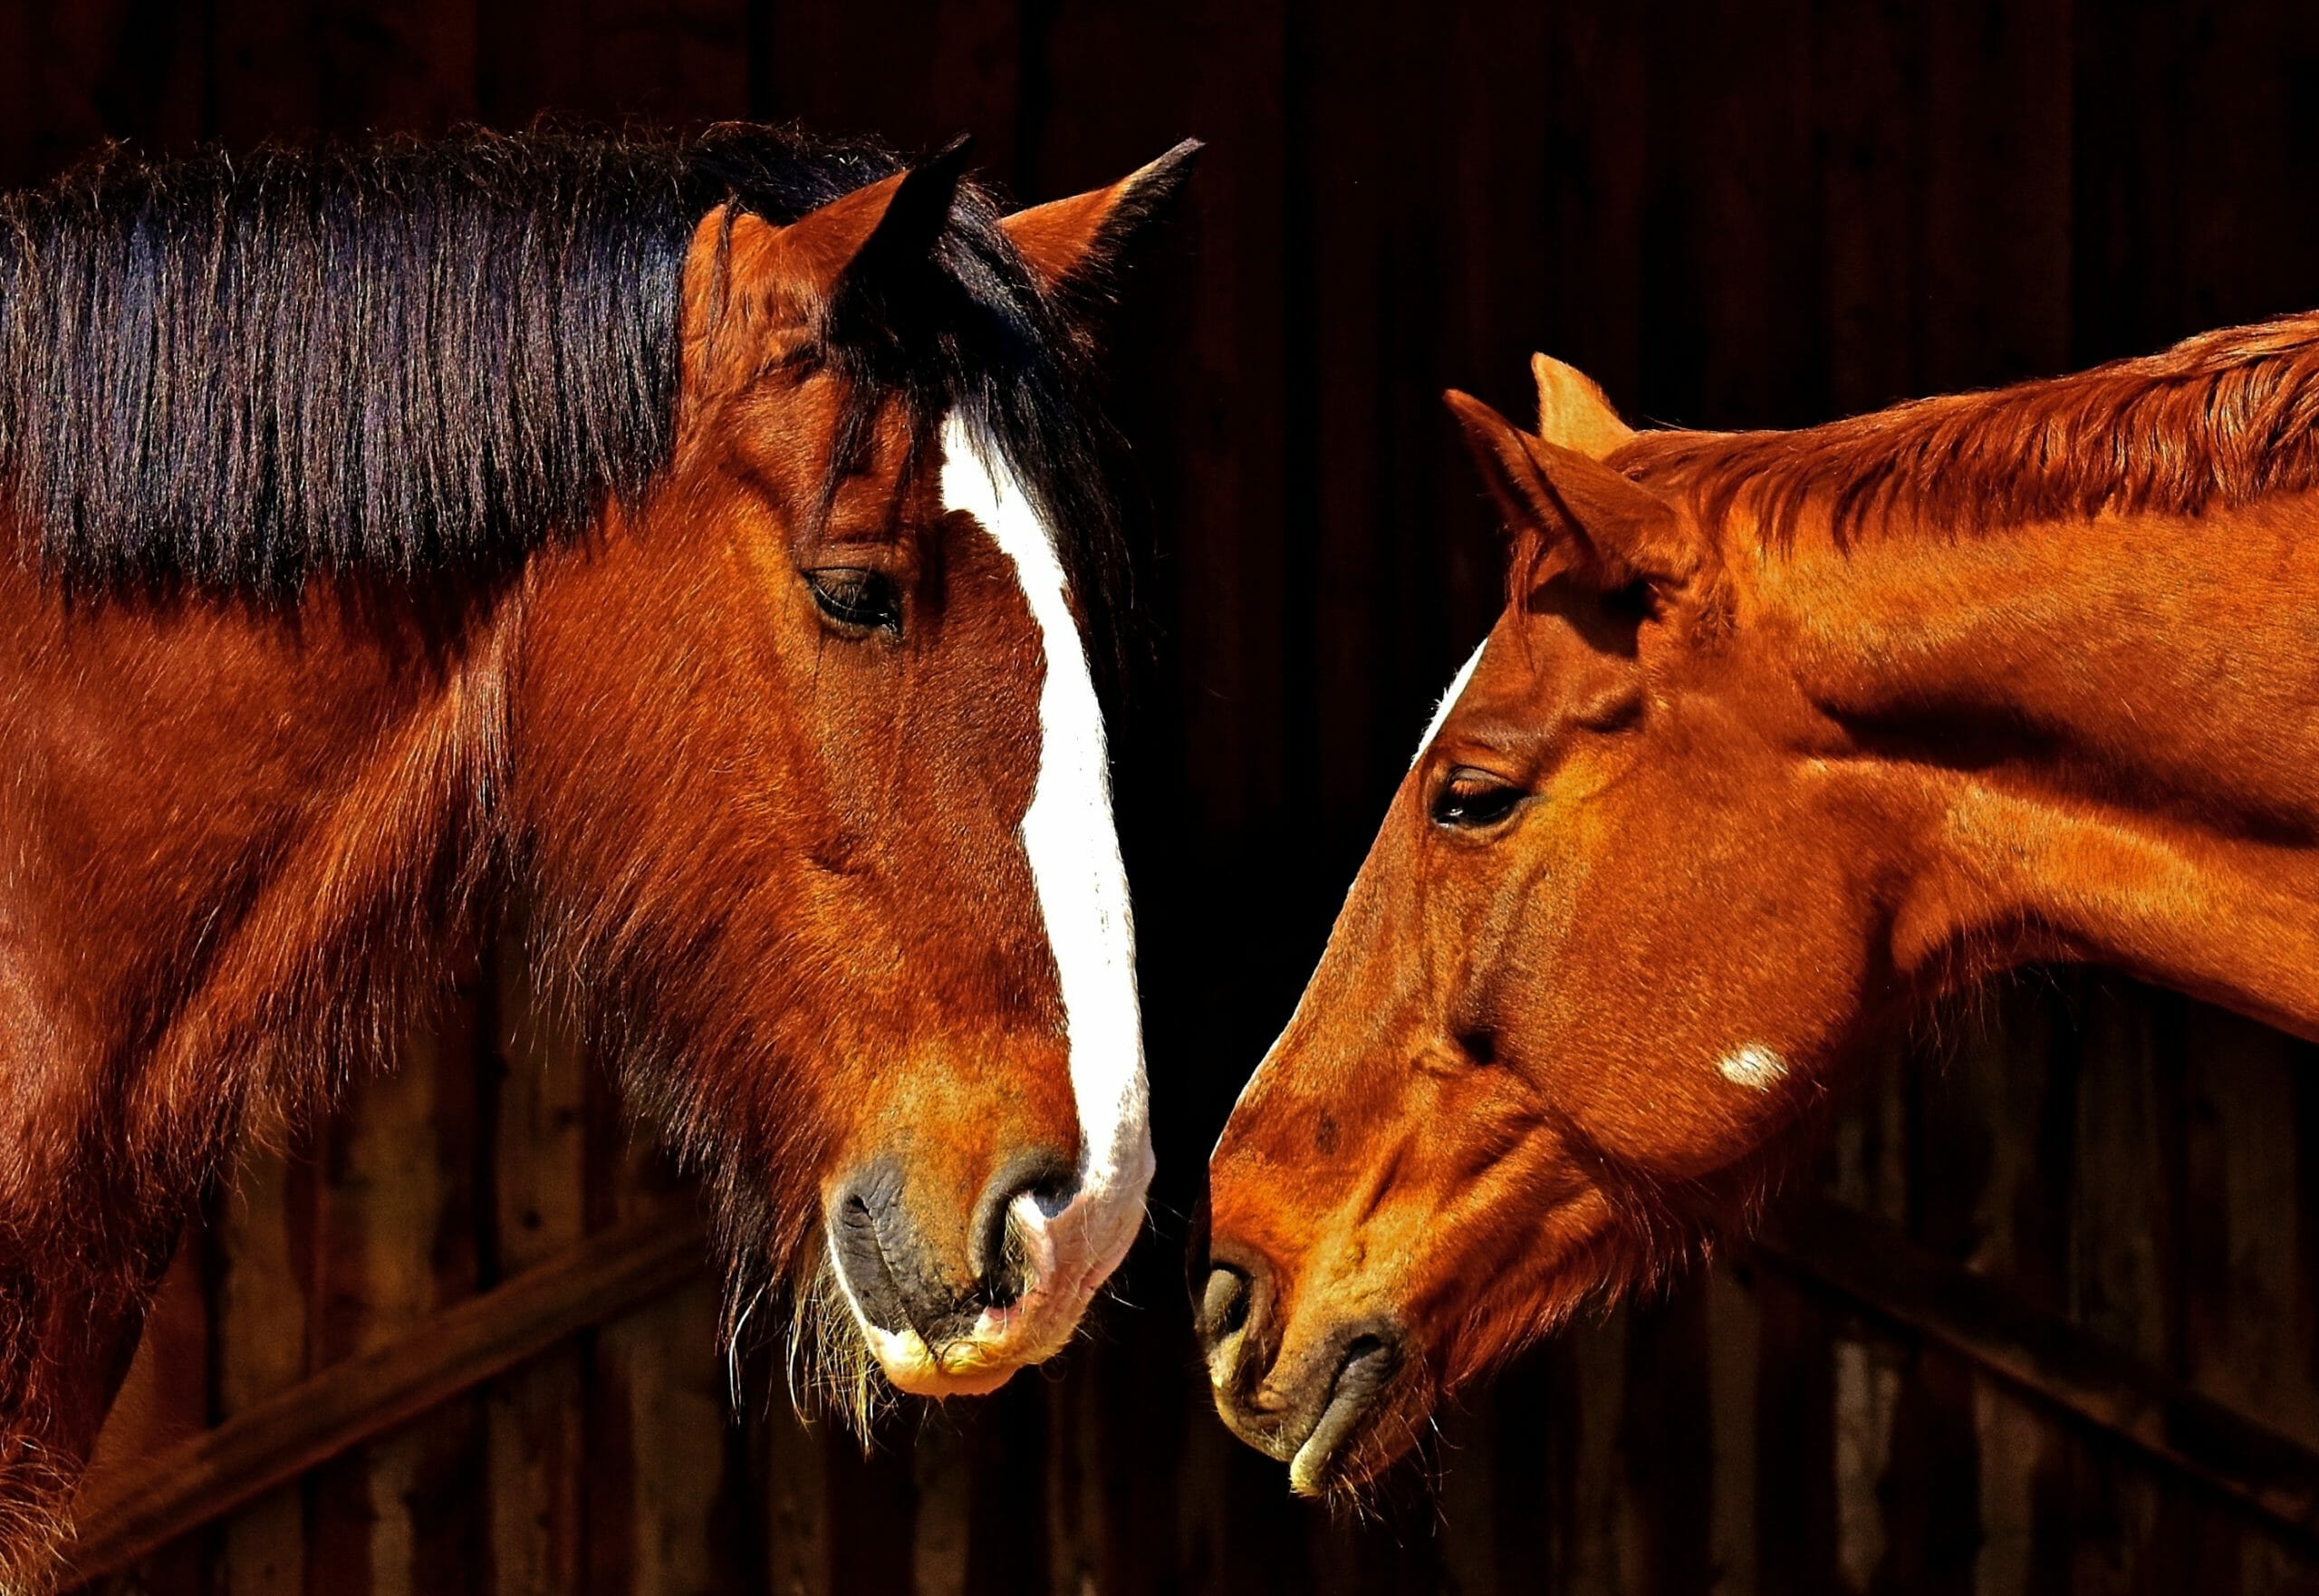 are horses empathetic? Research on empathy in animals